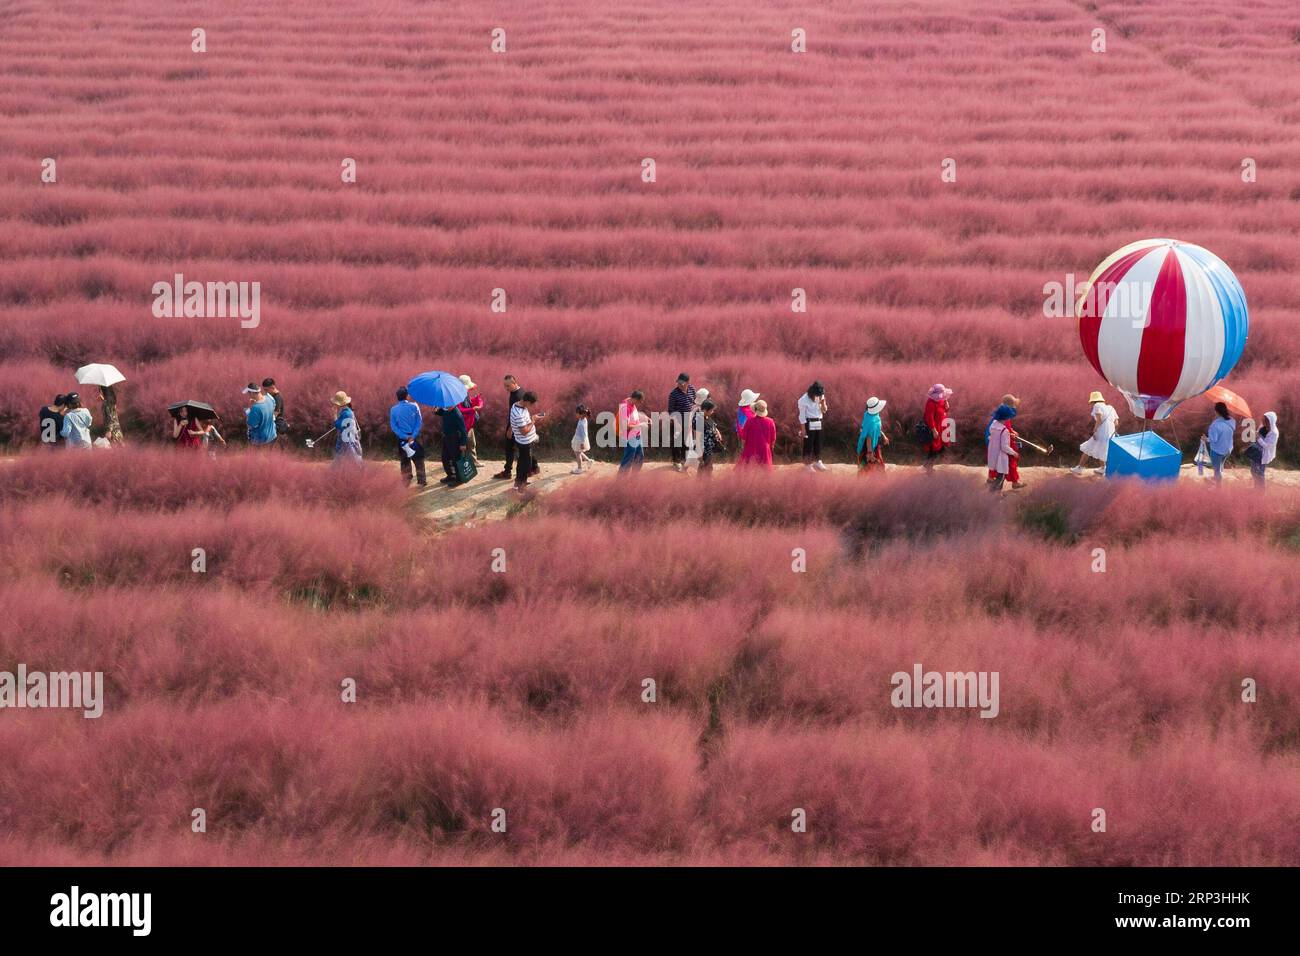 (181007) -- BEIJING, Oct. 7, 2018 -- Aerial photo shows visitors in a field of pink grass (muhlenbergia capillaris) in Nanjing, capital of east China s Jiangsu Province, Oct. 3, 2018. ) XINHUA PHOTO WEEKLY CHOICES SuxYang PUBLICATIONxNOTxINxCHN Stock Photo